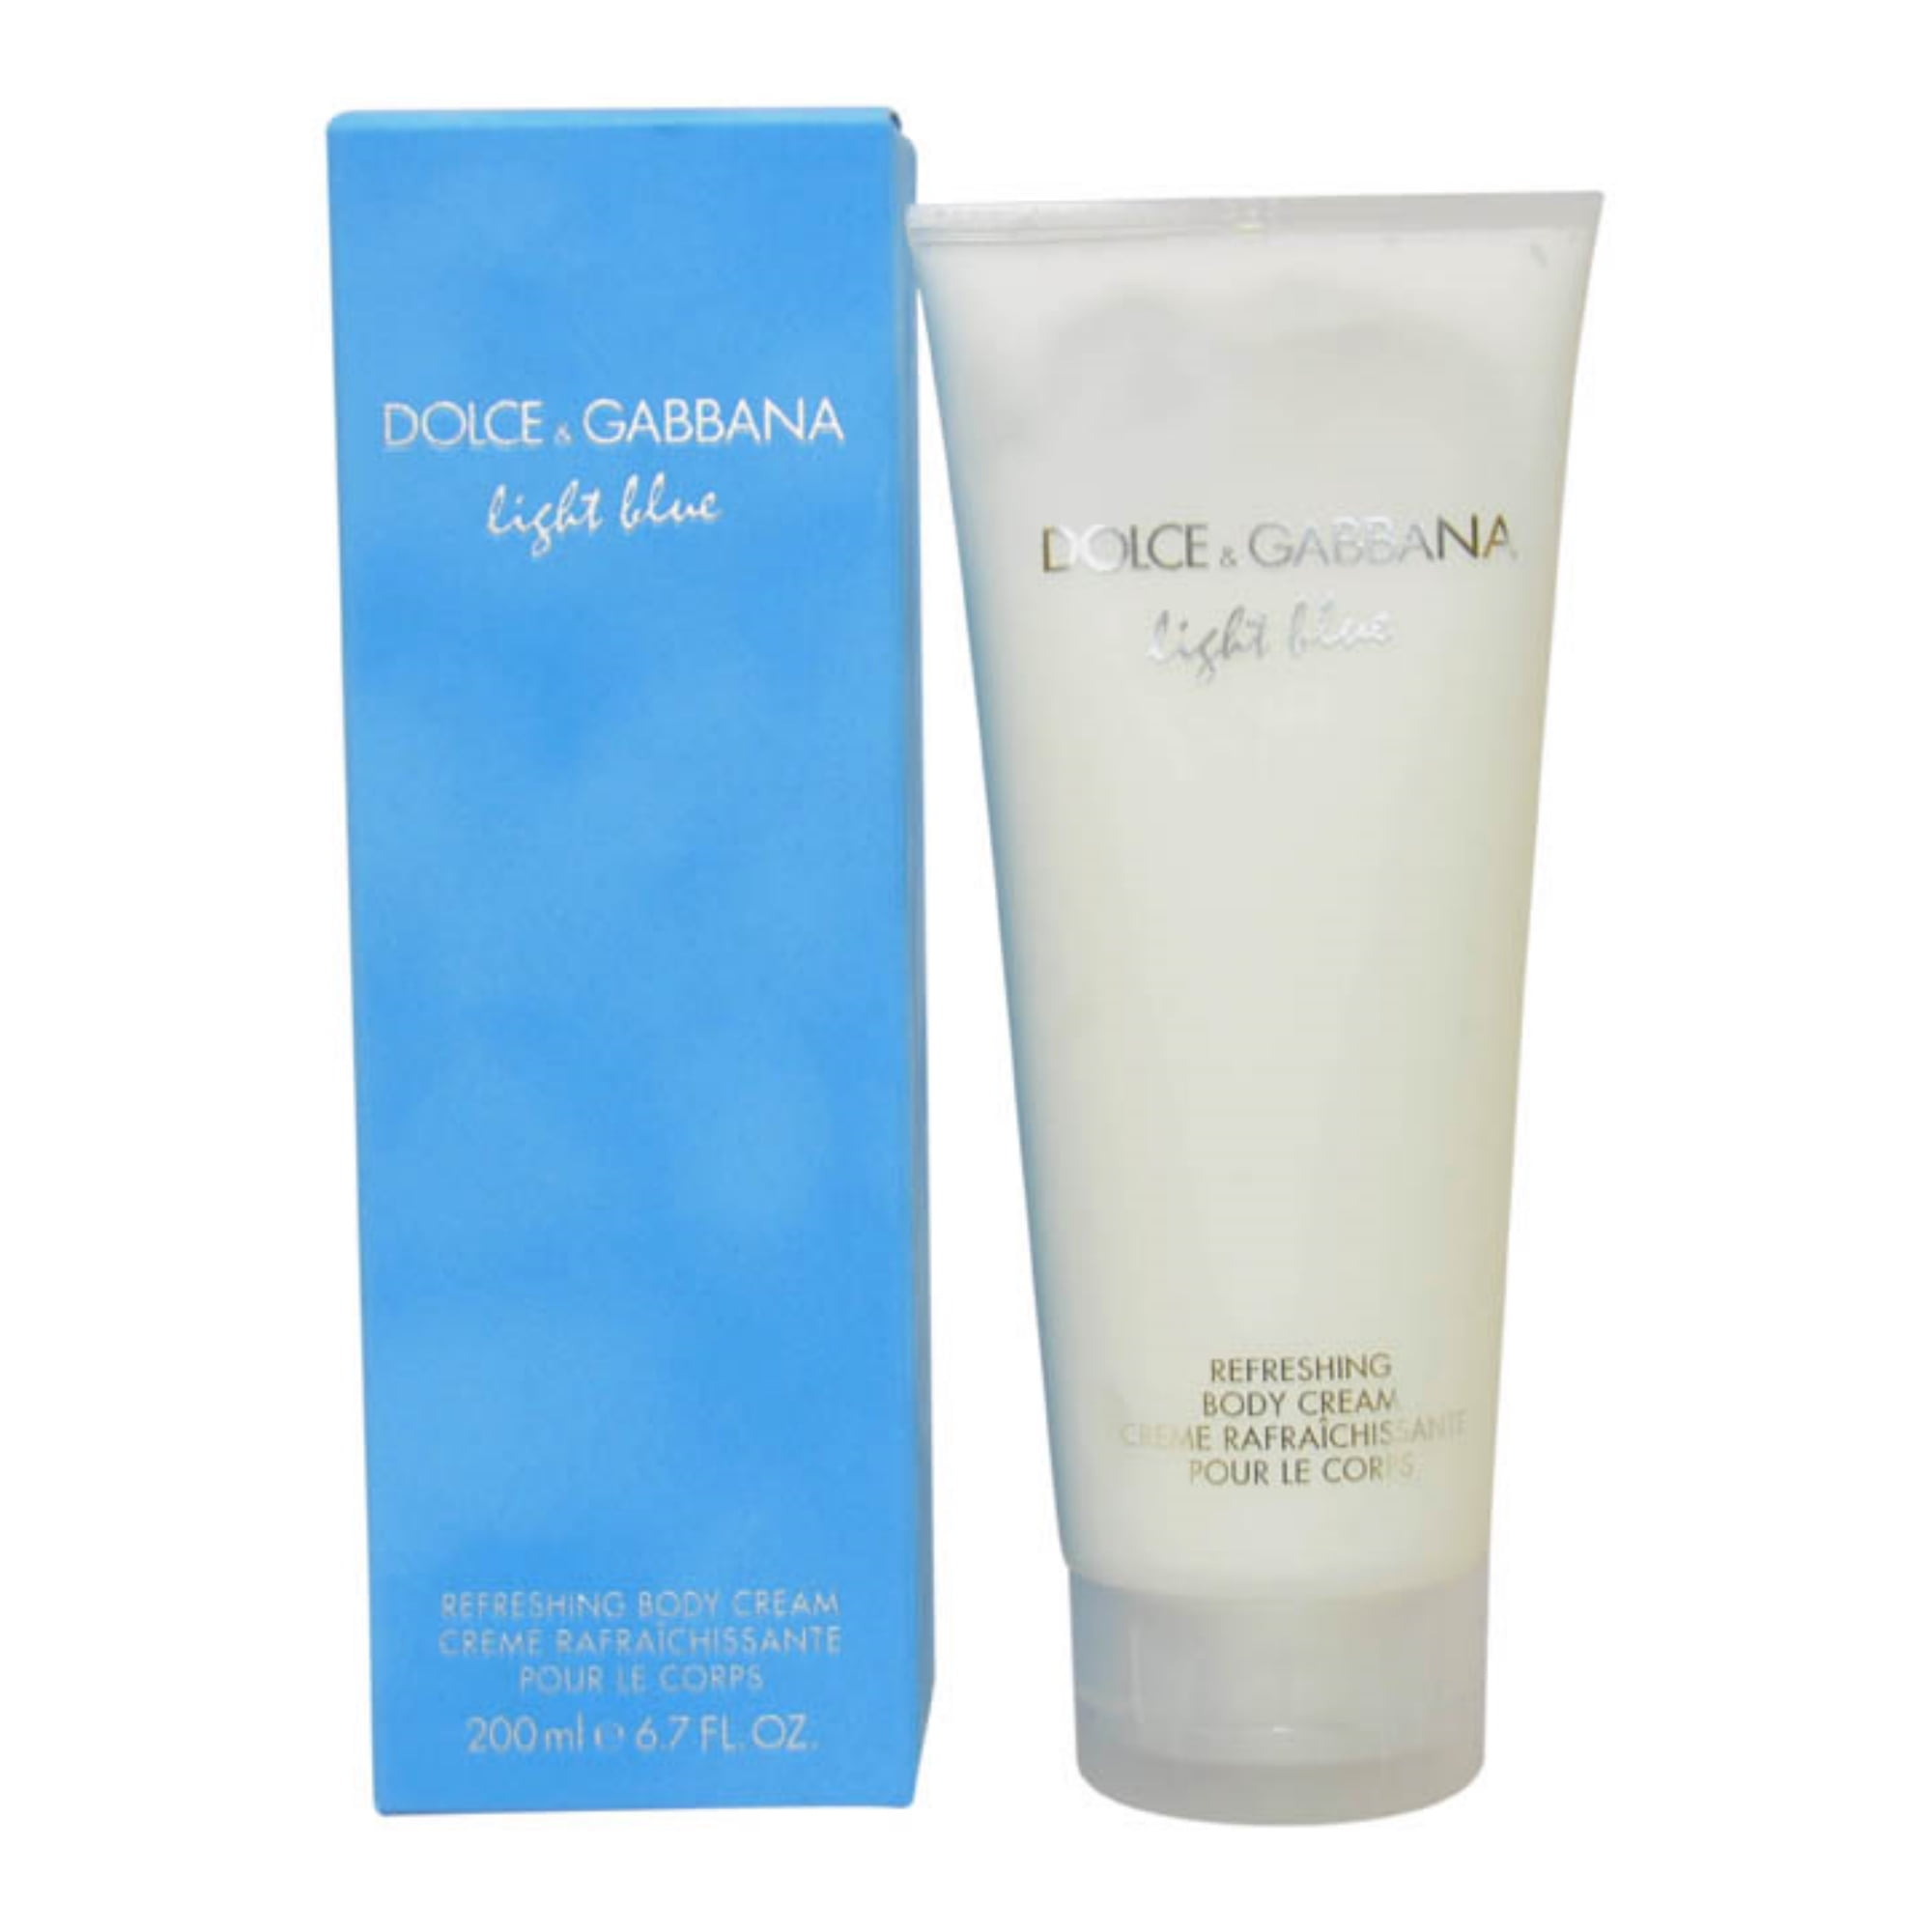 dolce and gabbana body lotion